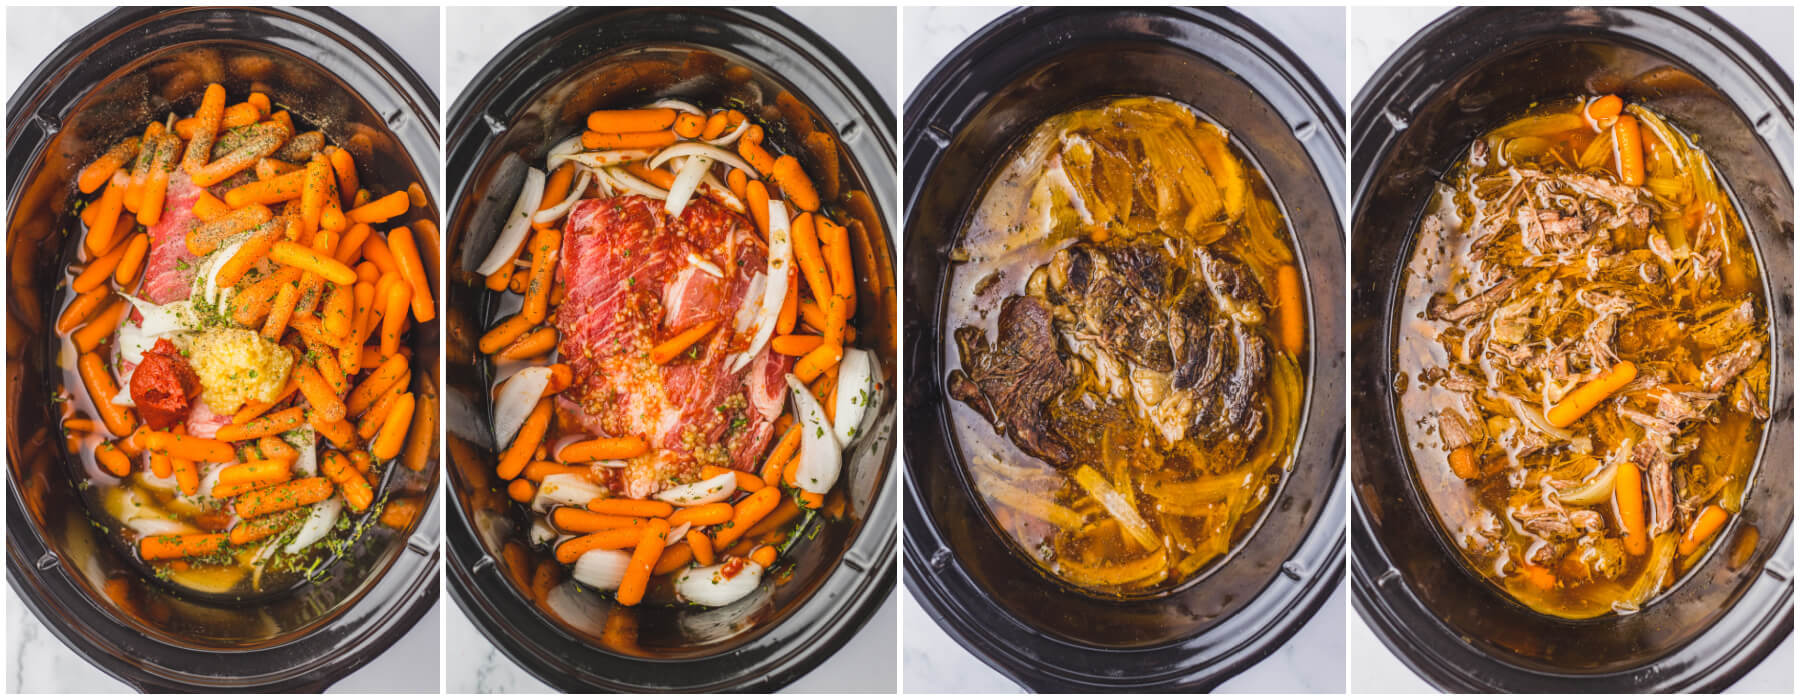 A series of photos showing stages of making crock pot chuck roast in a black crock pot insert.